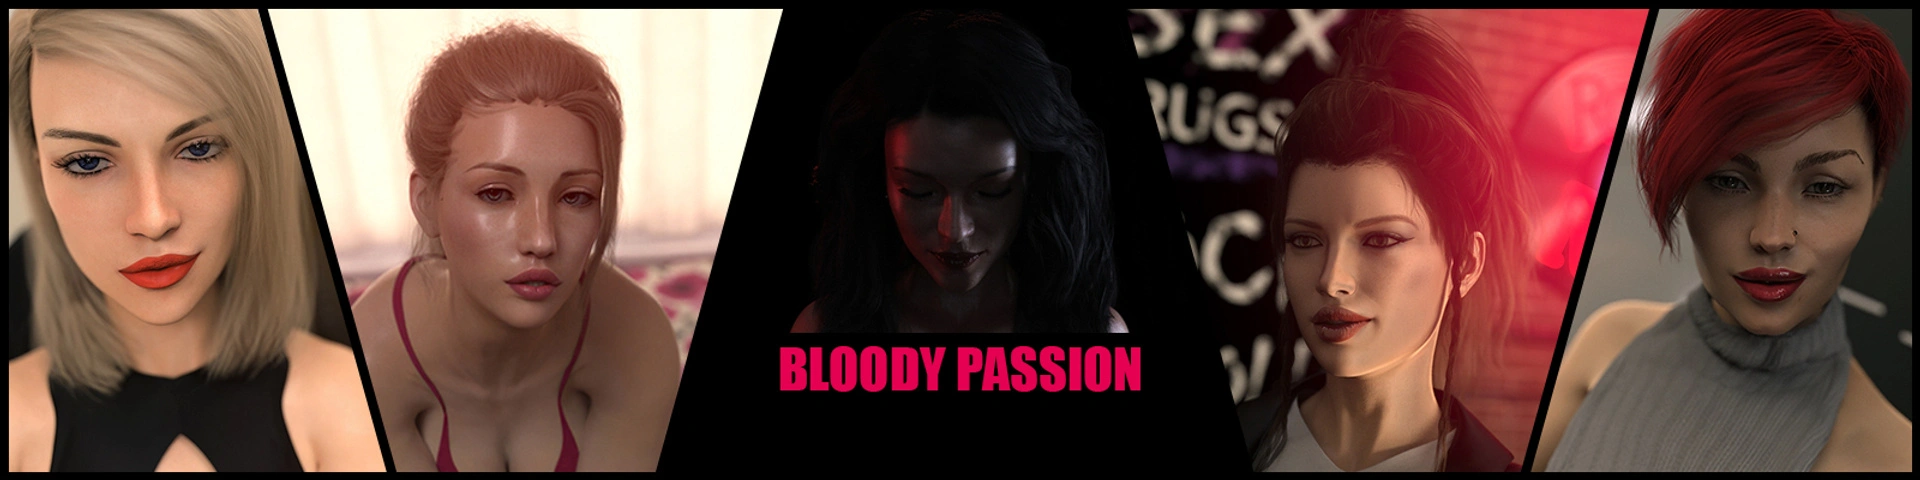 Bloody Passion [v0.1] main image